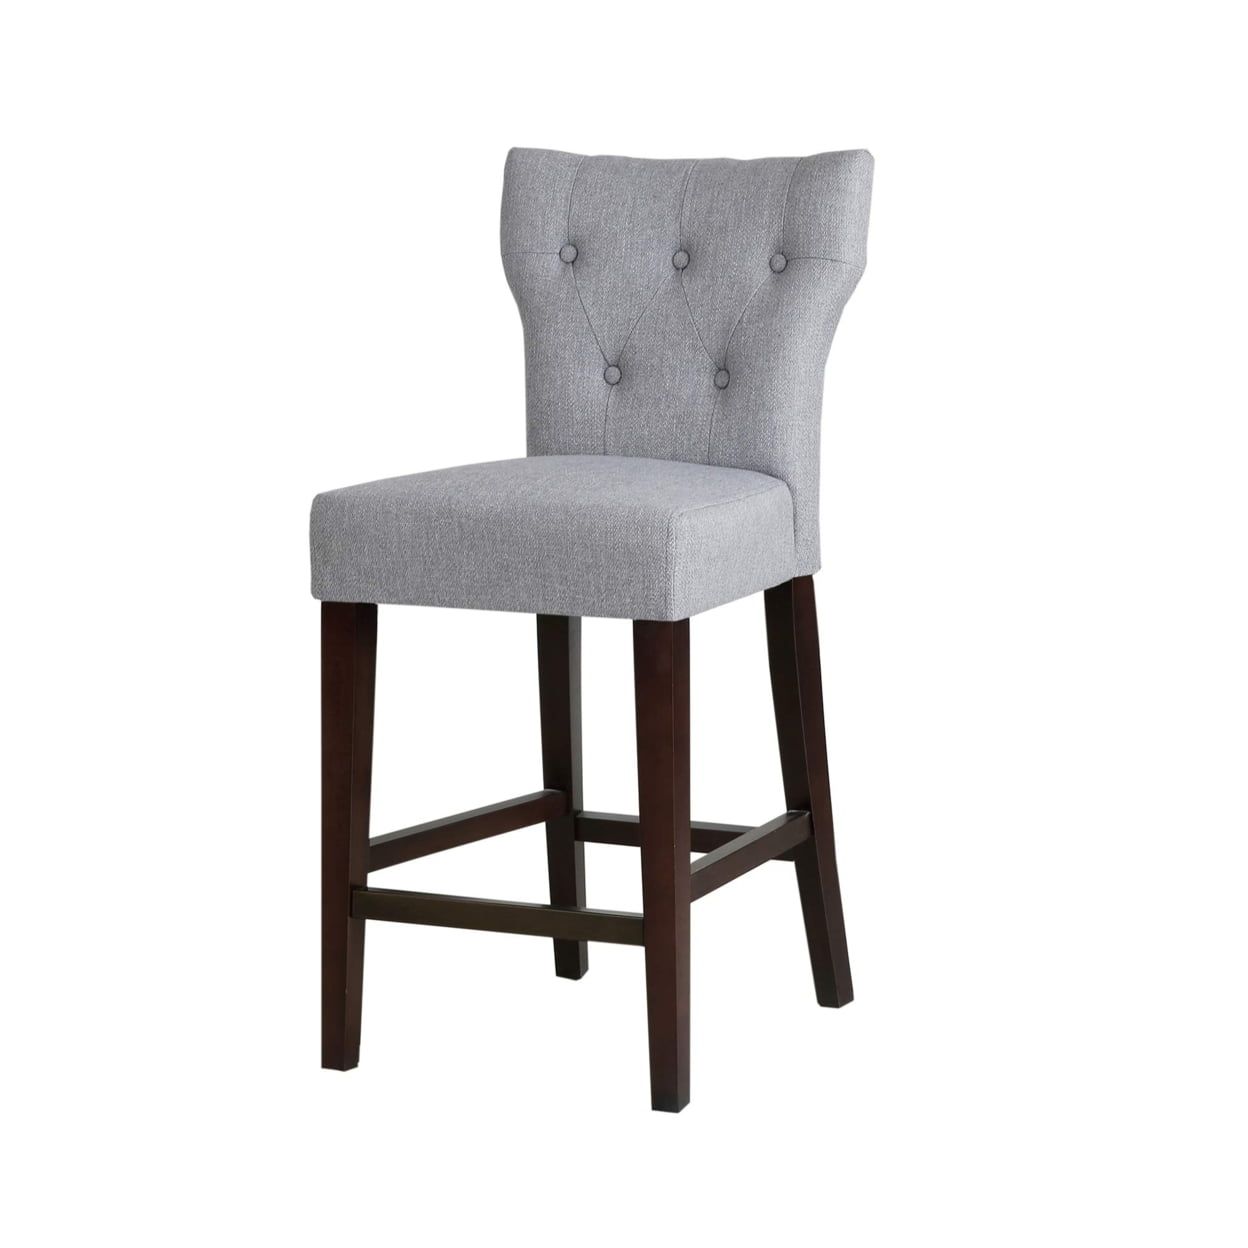 Gray Tufted Back Saddle Style Counter Stool with Wood Frame